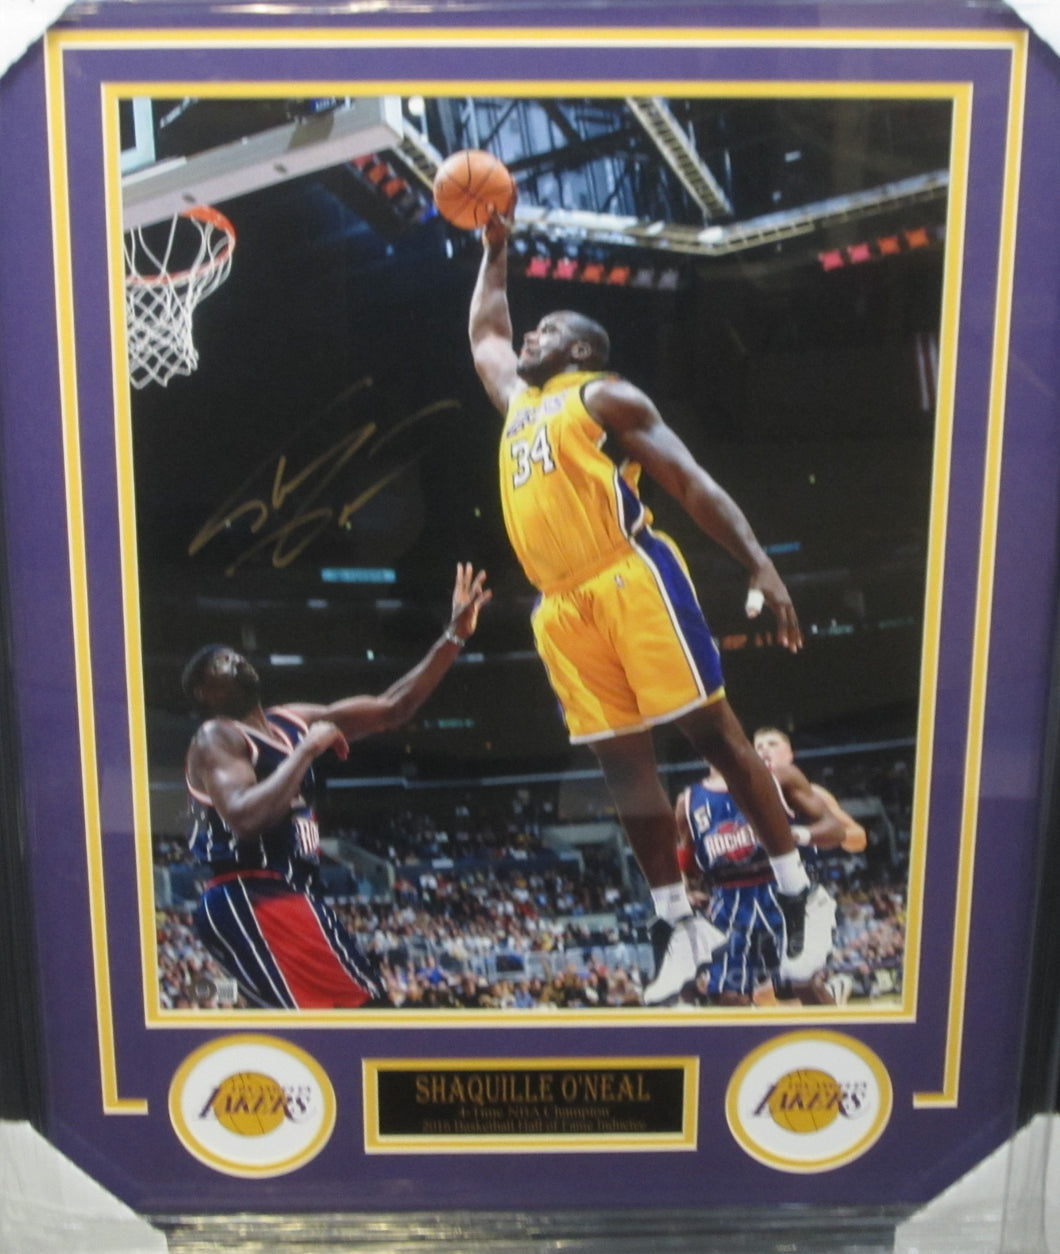 Los Angeles Lakers Shaquille O'Neal SIGNED Framed Matted 16x20 Photo With BECKETT COA